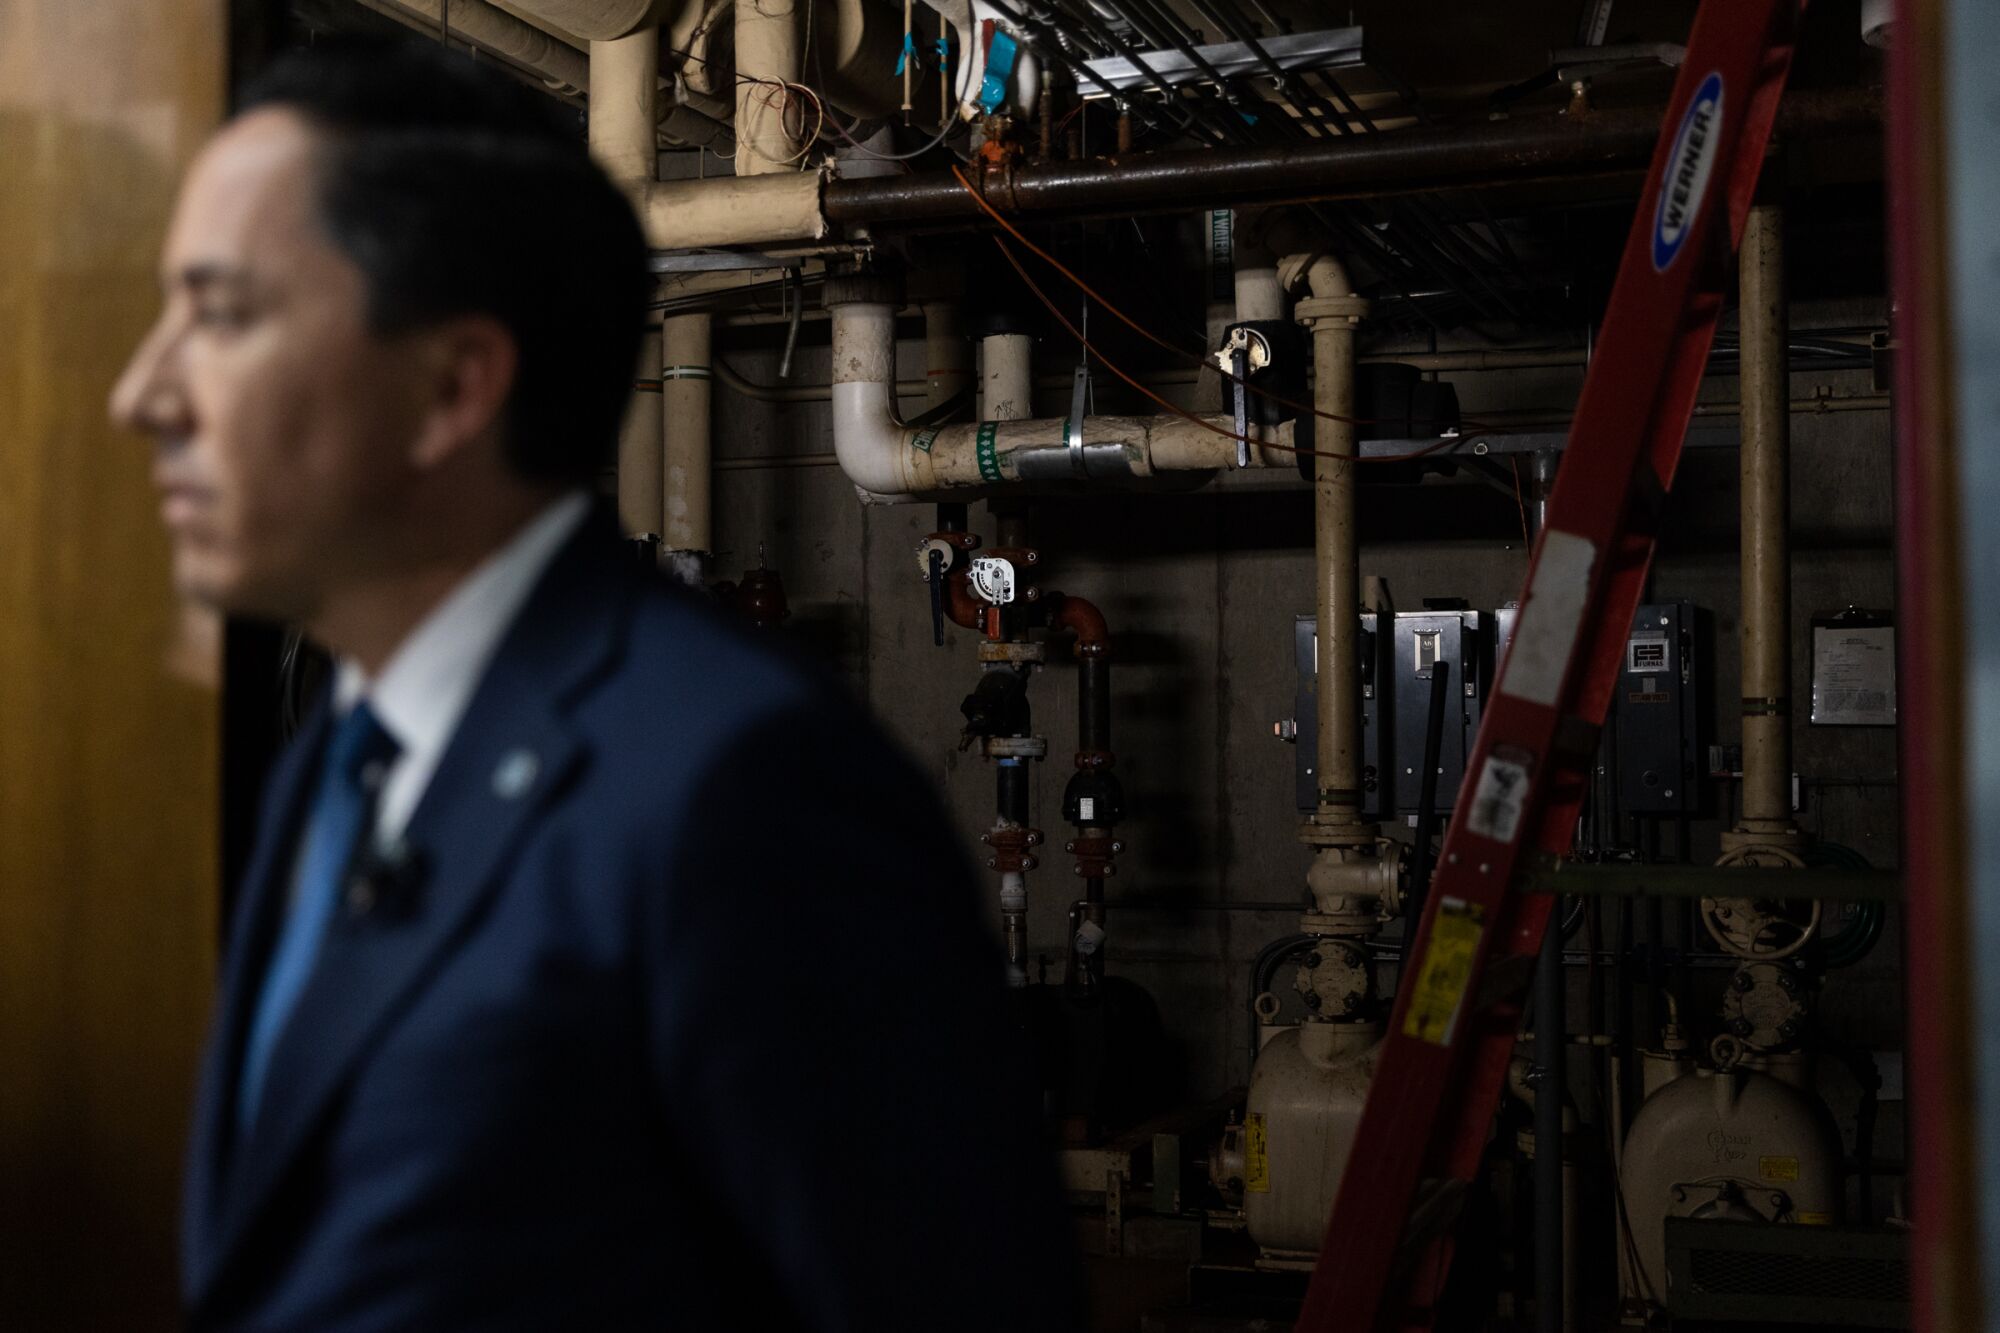 Mayor Todd Gloria stands outside an HVAC room, which contains dated systems, at the City Operations Building.